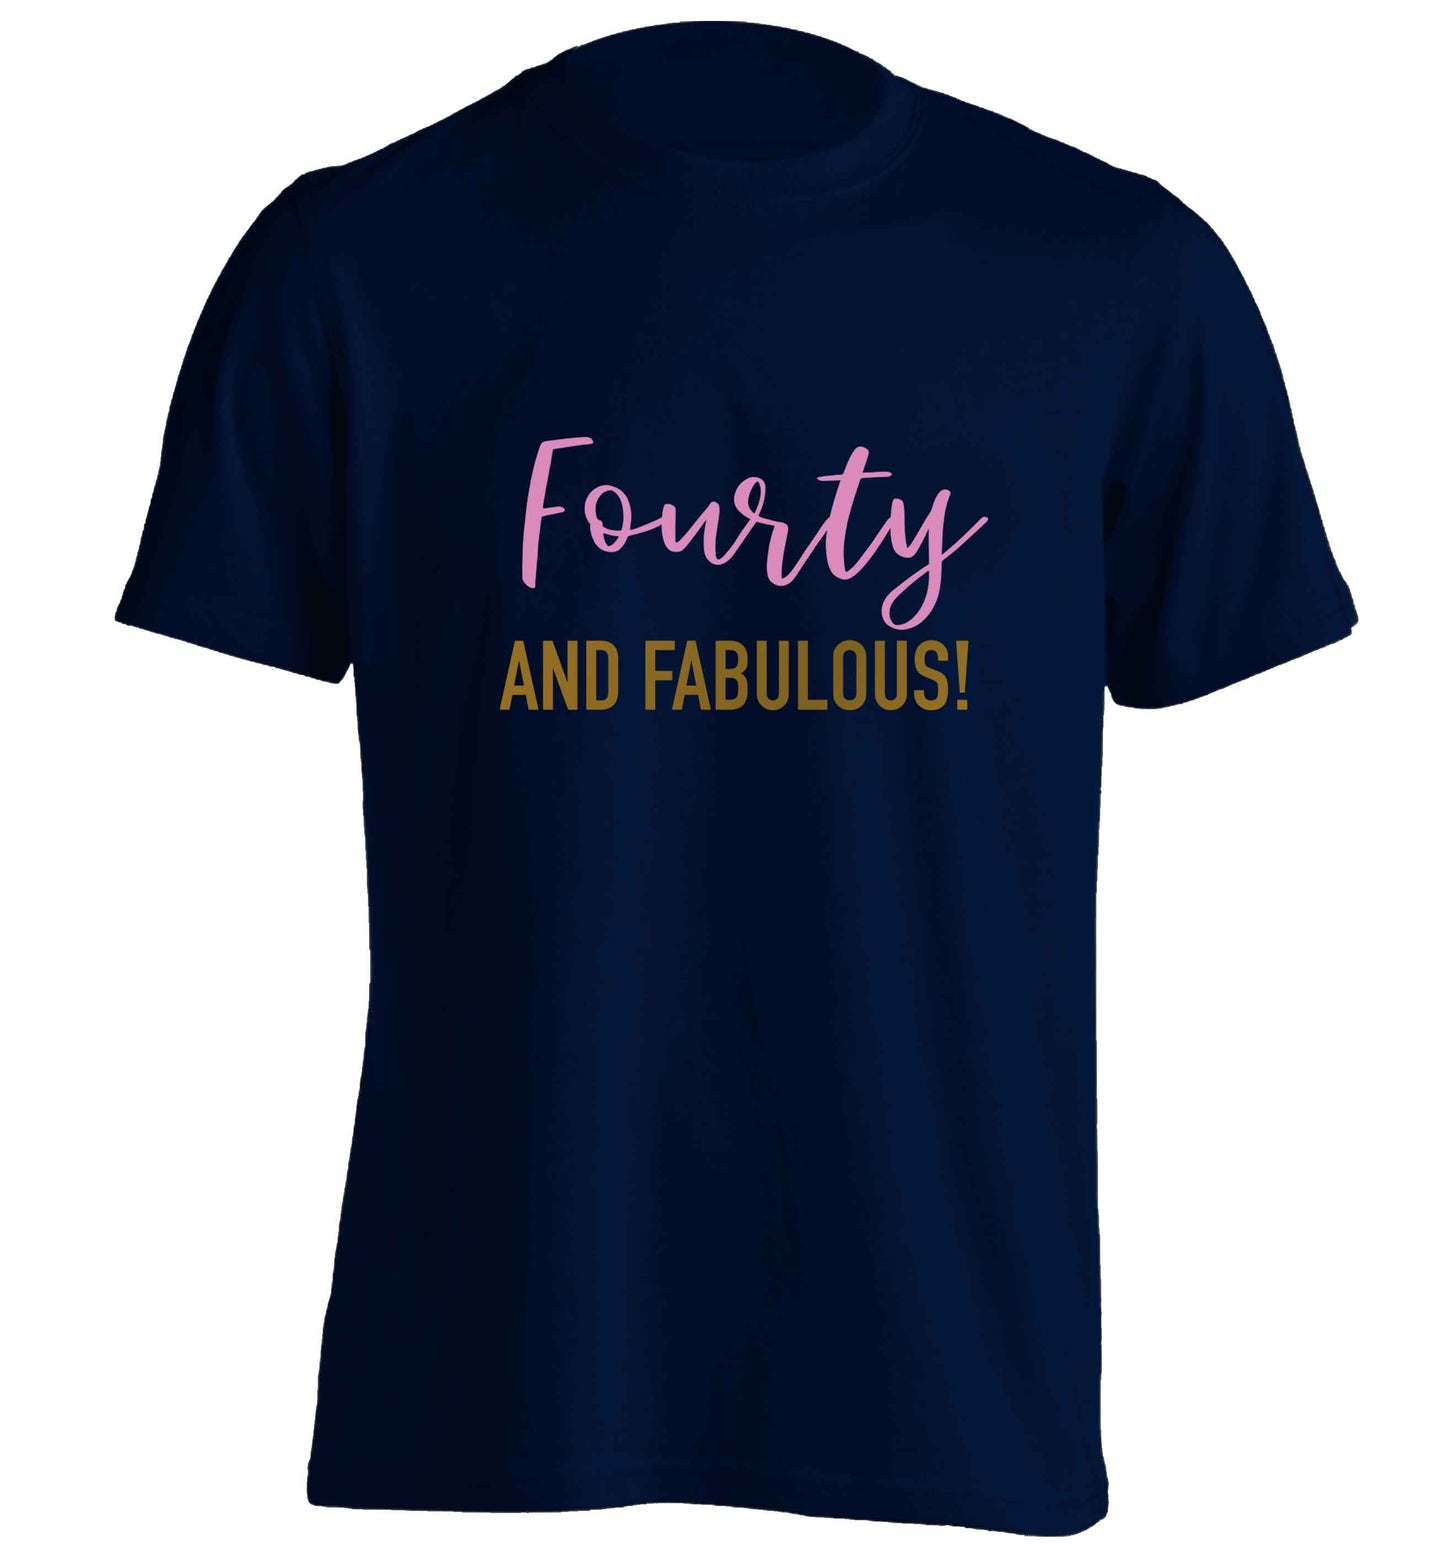 Fourty and fabulous adults unisex navy Tshirt 2XL